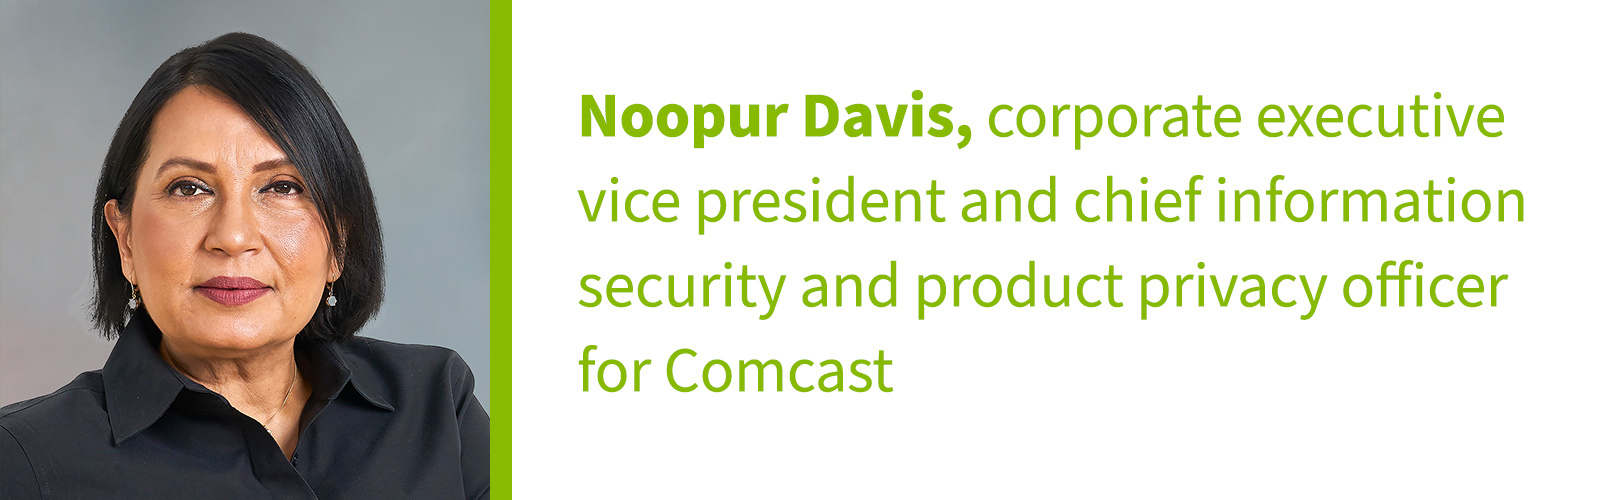 Noopur Davis: corporate executive vice president and chief information security and product privacy officer for Comcast